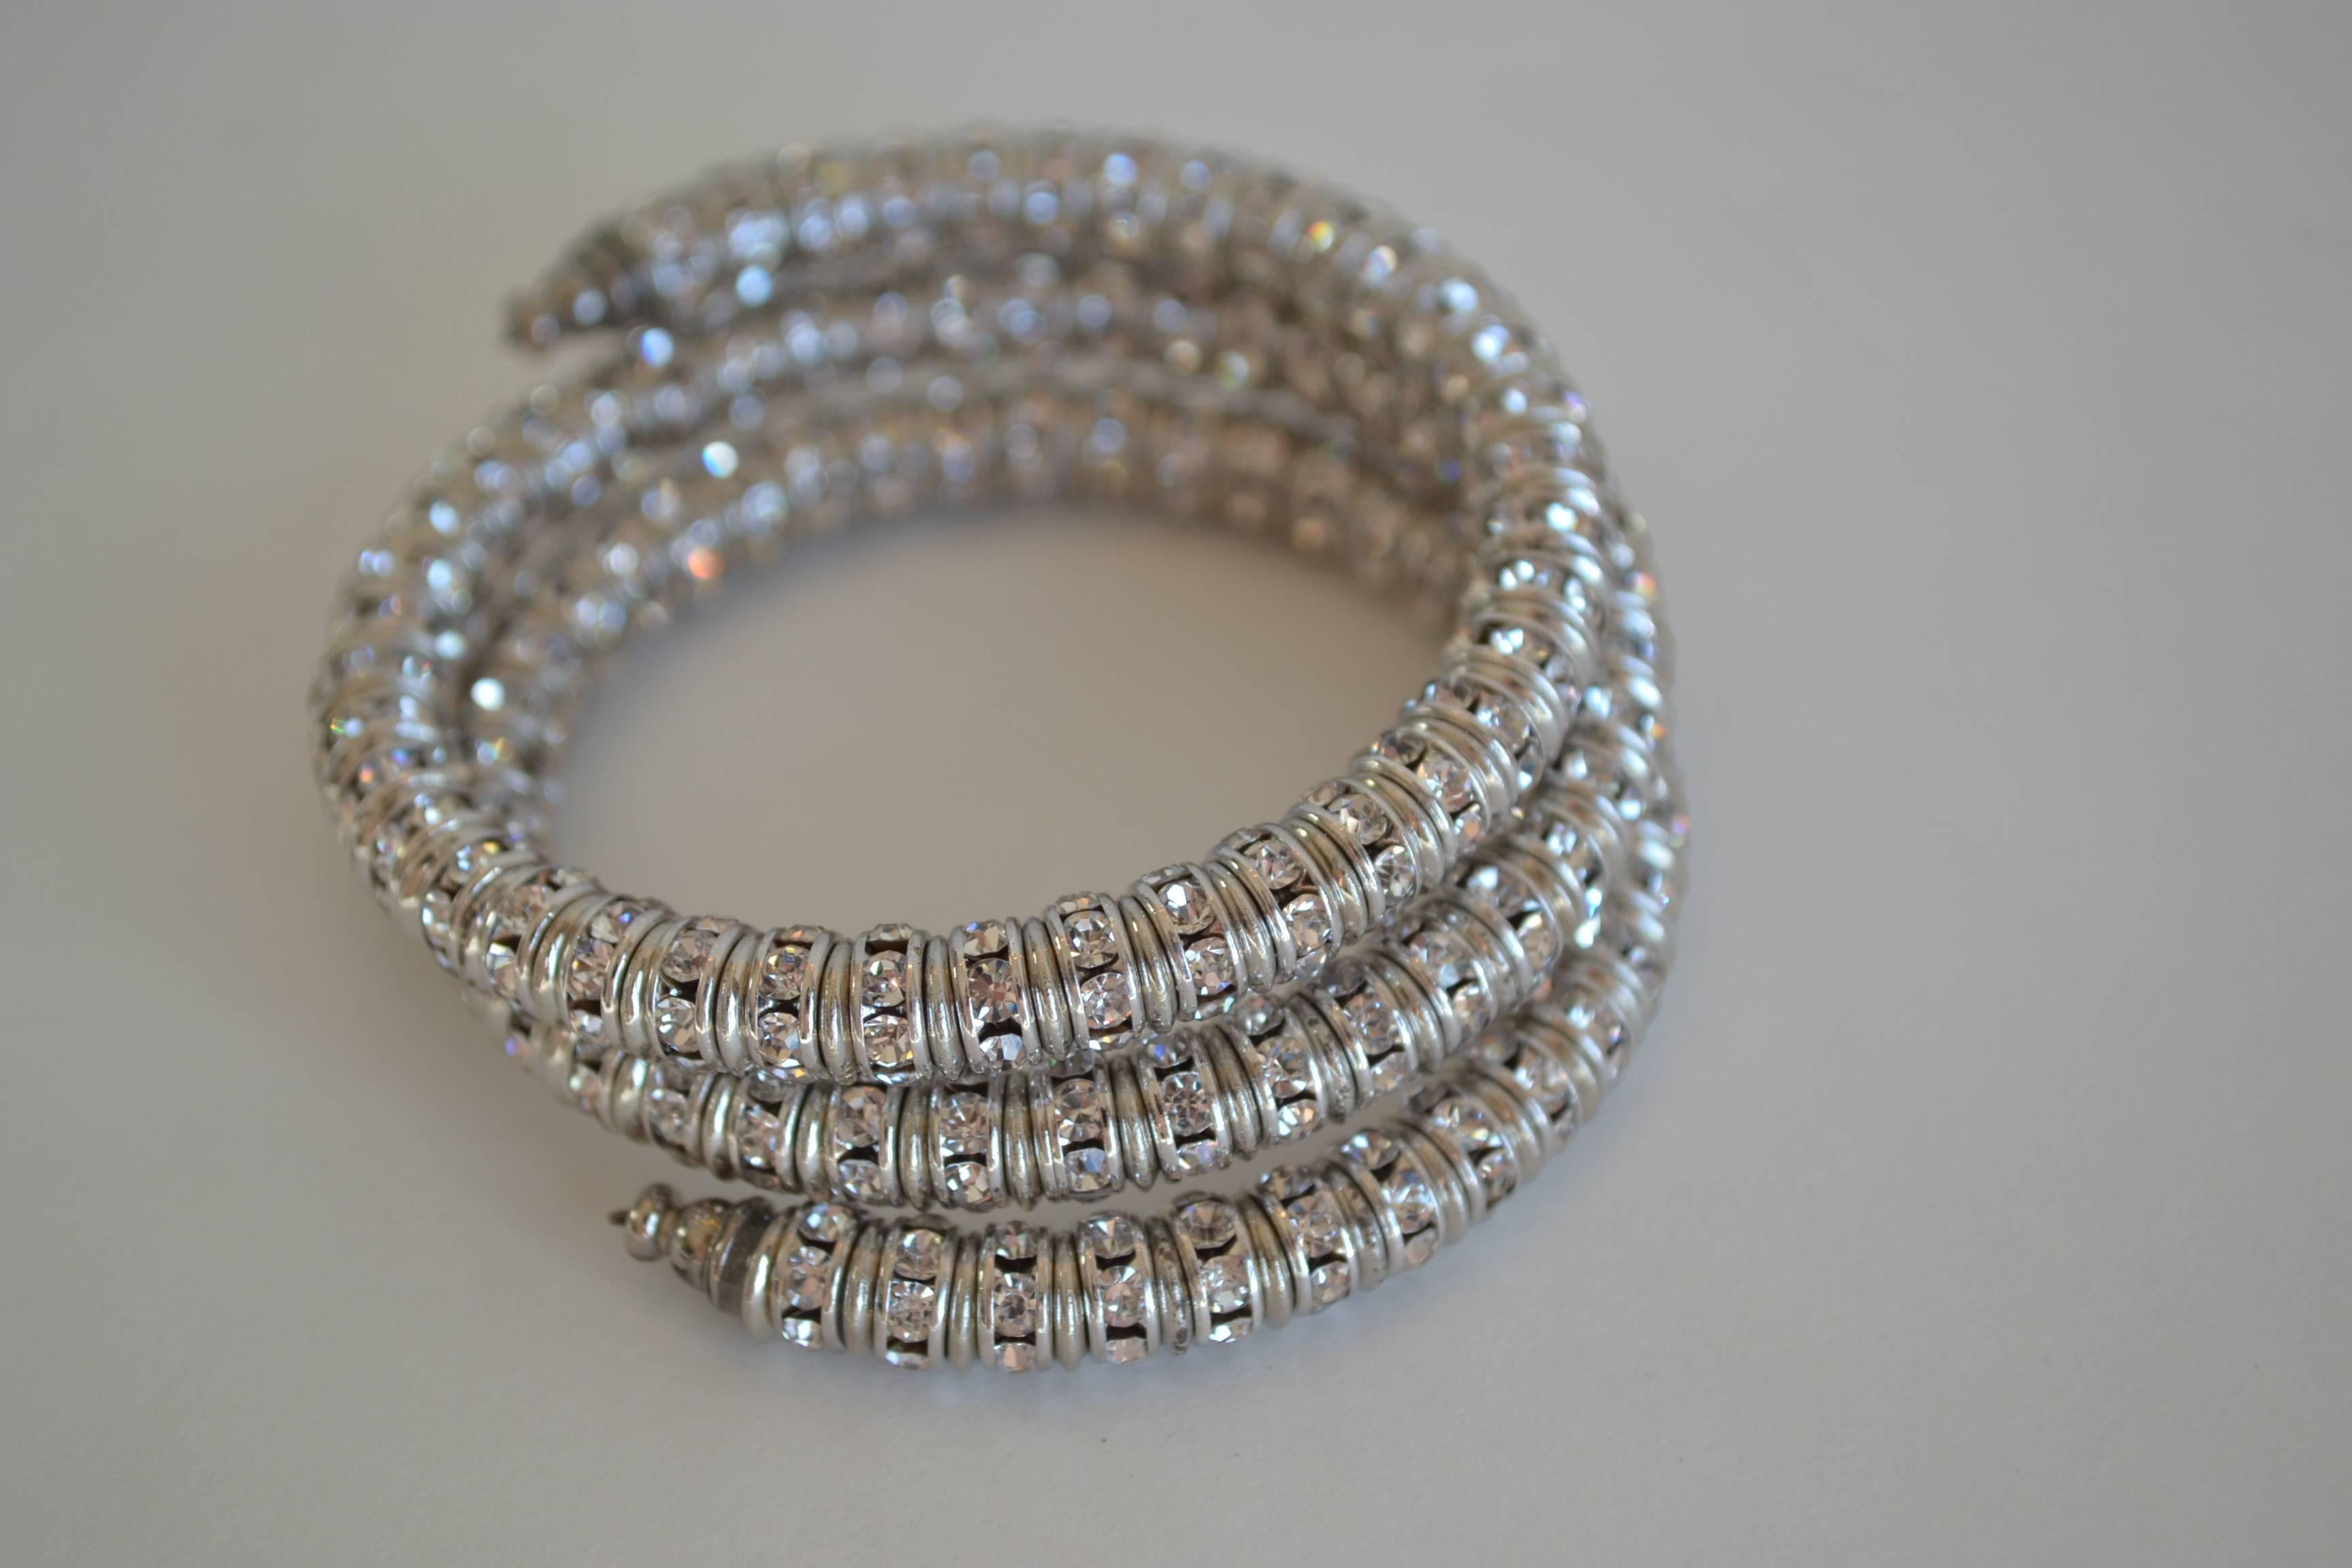 Memory wire wrap bracelet with clear Swarovski crystal rondelles from Francoise Montague. Fits most wrists both large and small and is easy to take on and off.

Francoise Montague took over the De Saurma jewelry workshop in the late 1940s. Her